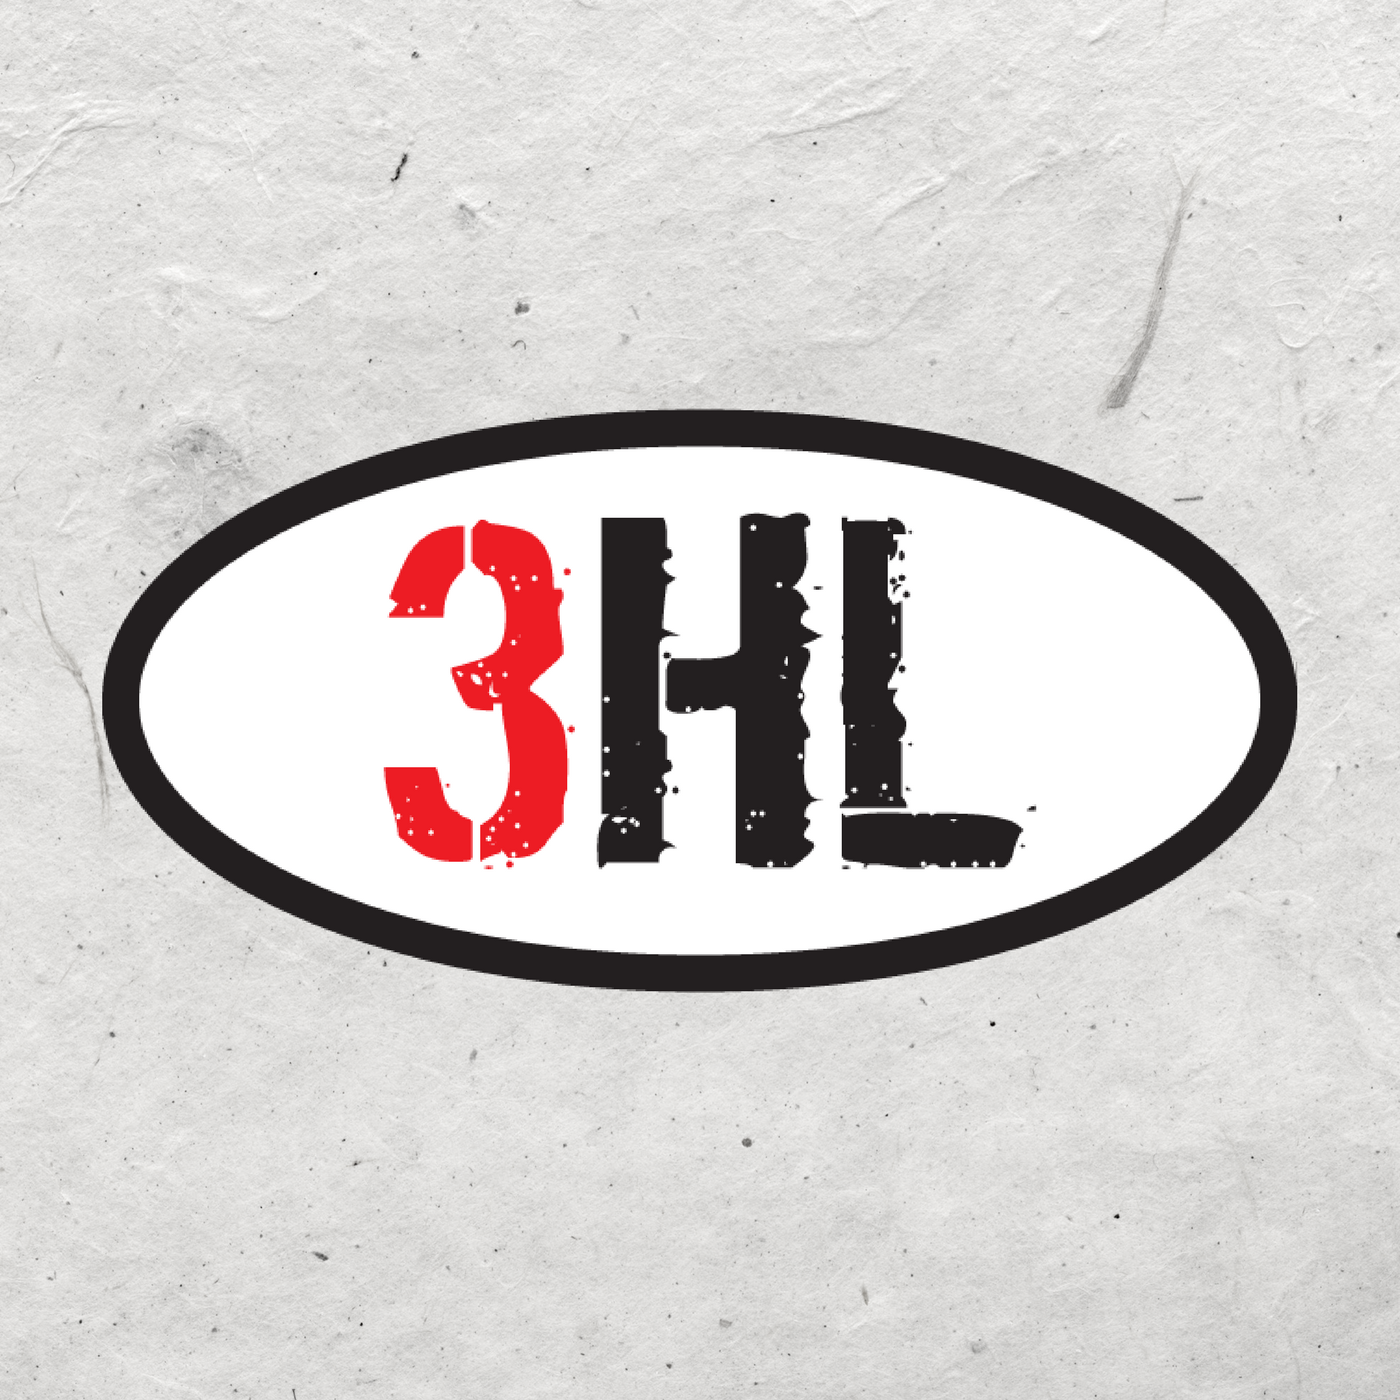 3HL - 3-12-24 - Hour 2 - "Henry Emptied the Bucket"